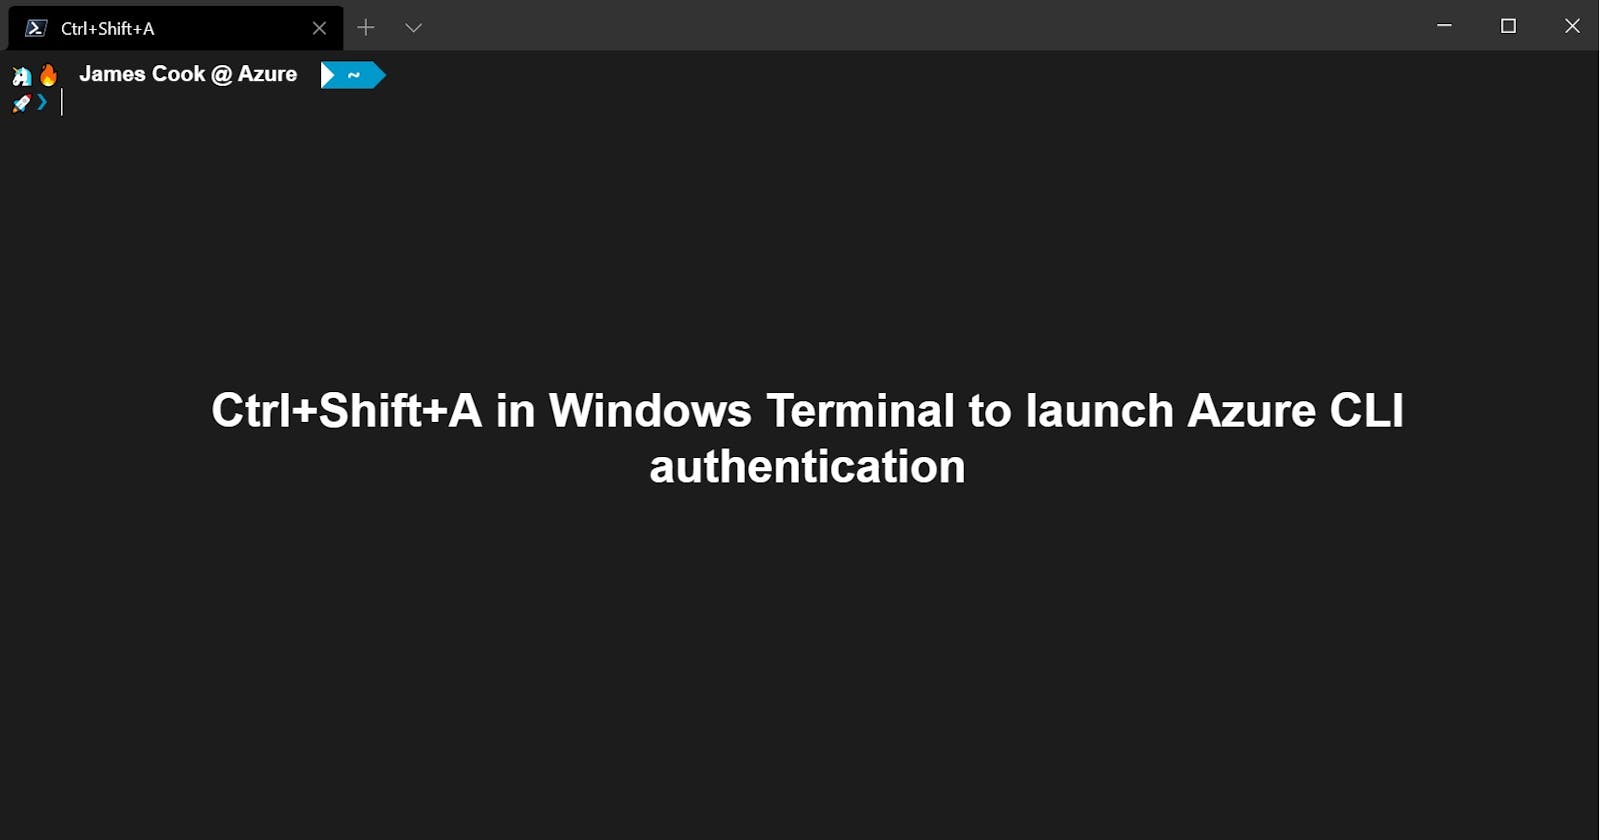 Ctrl+Shift+A in Windows Terminal to launch Azure CLI authentication